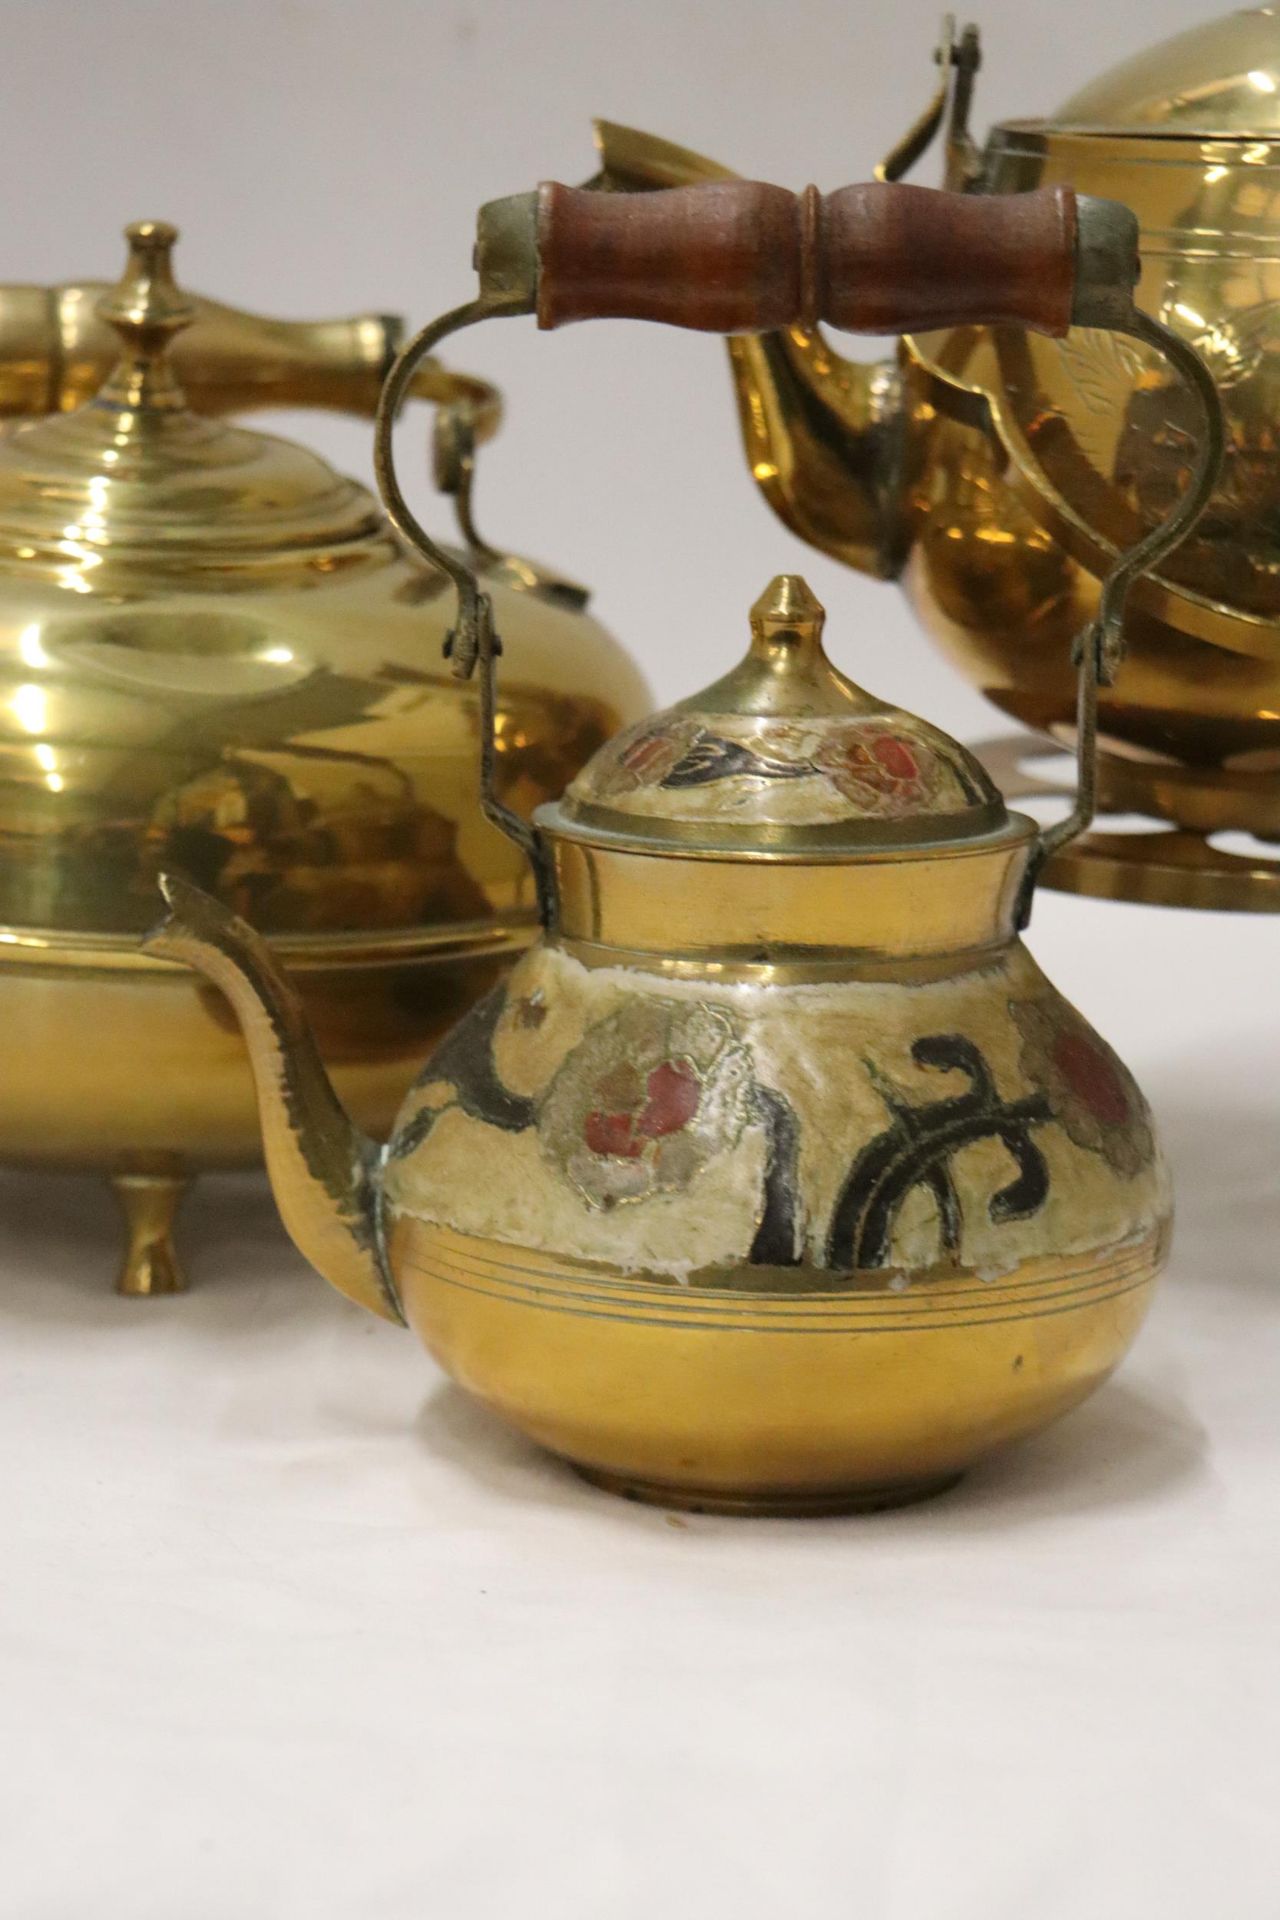 TWO BRASS KETTLES, A CLOISONNE KETTLE AND A TRIVET - Image 2 of 8